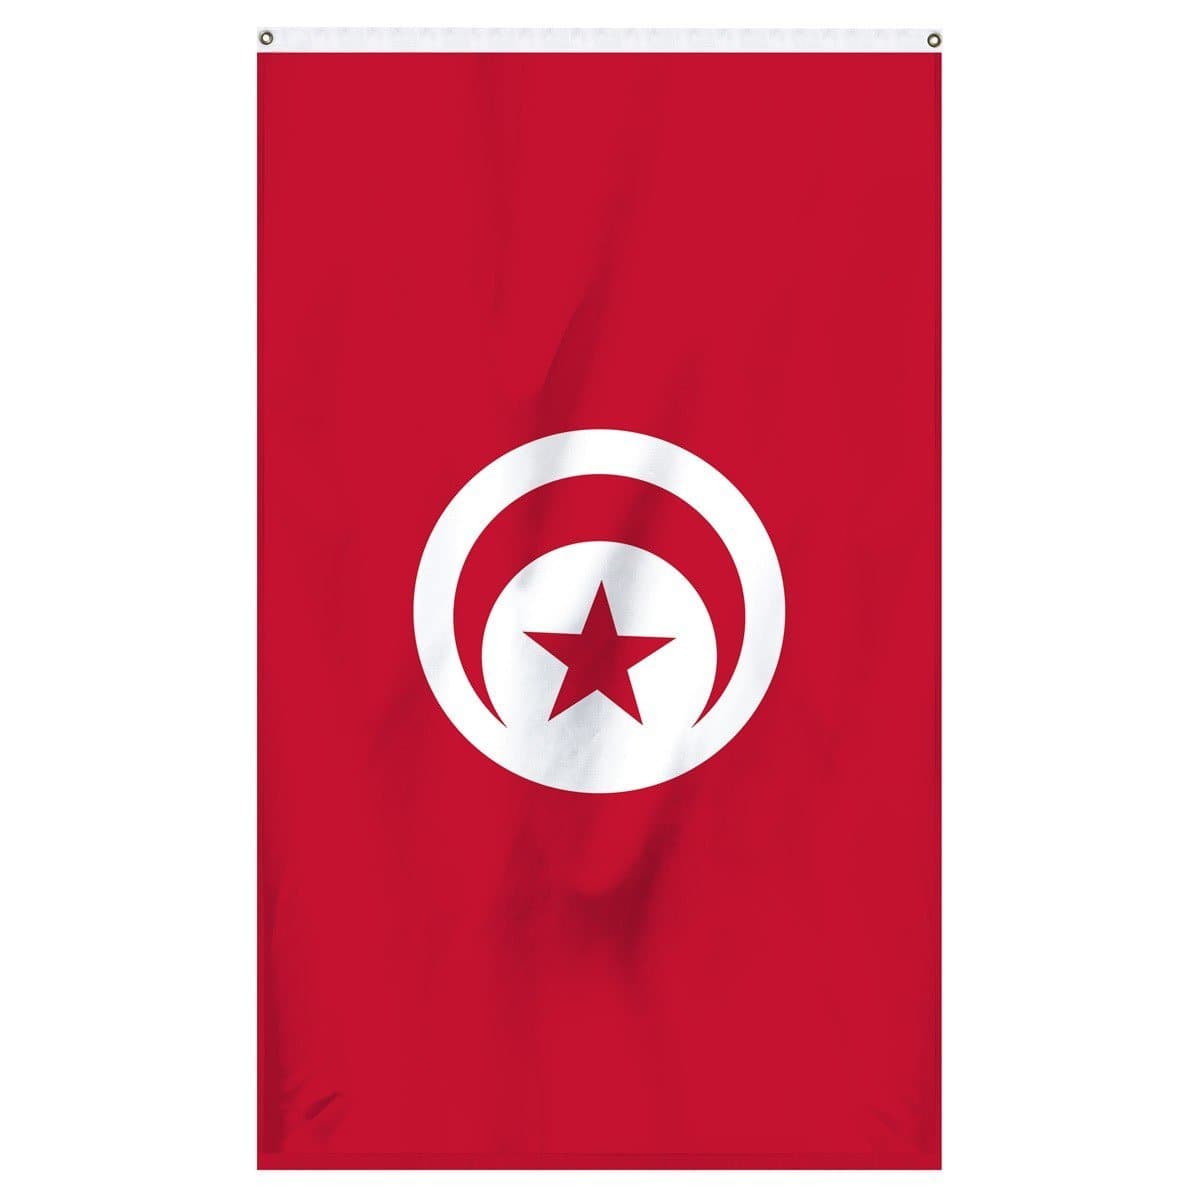 Tunisia National Flag for sale to buy online from Atlantic Flag and Pole. Red flag with a white circle in the center with a red crescent moon.